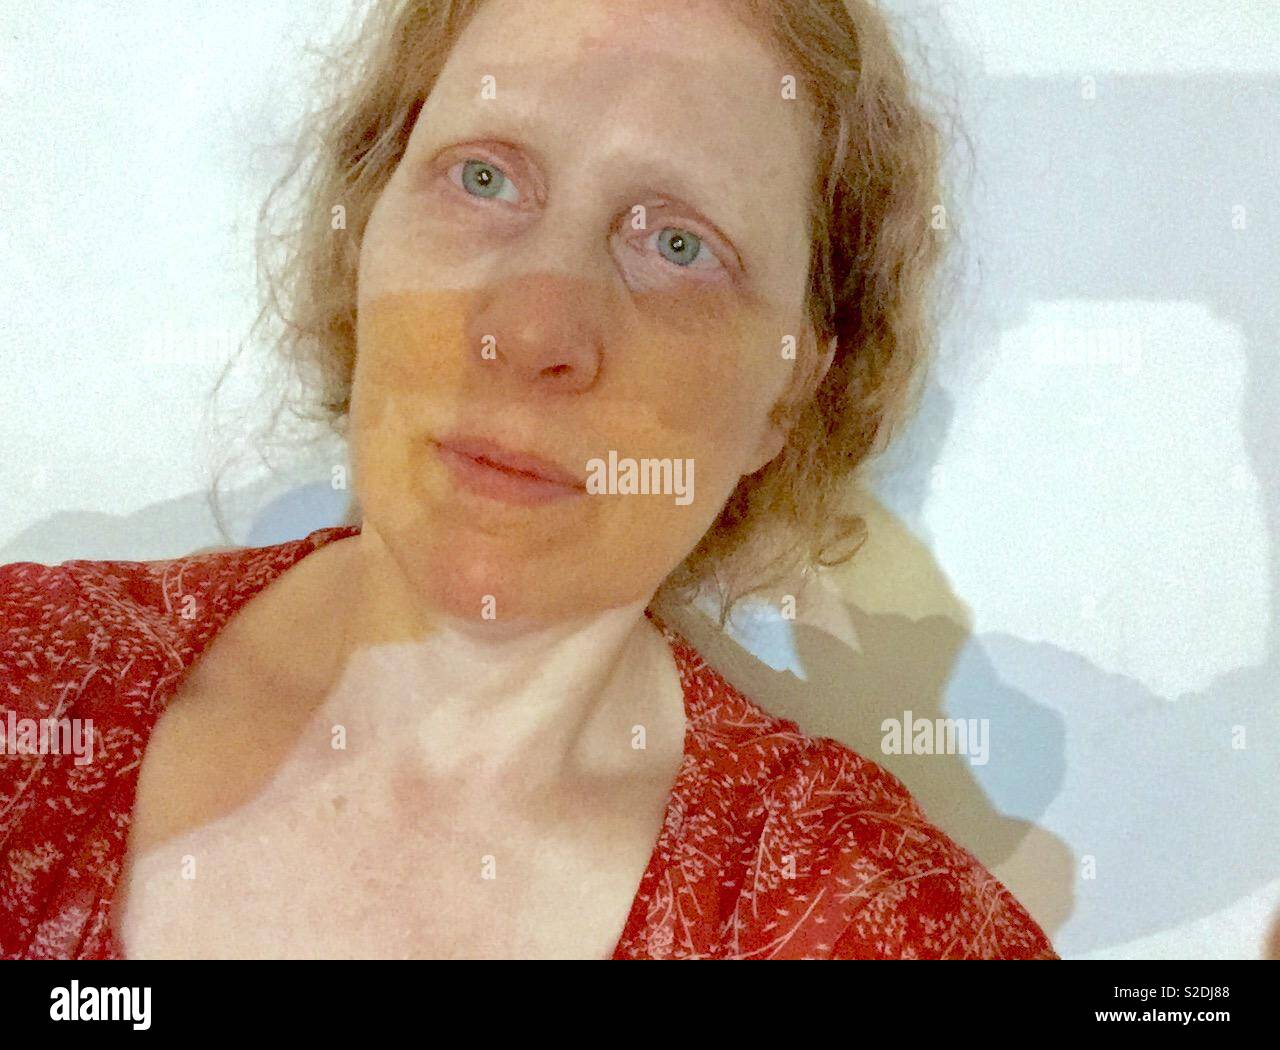 Red haired woman with freckles and light blue eyes taking a selfie against a white background. Stock Photo